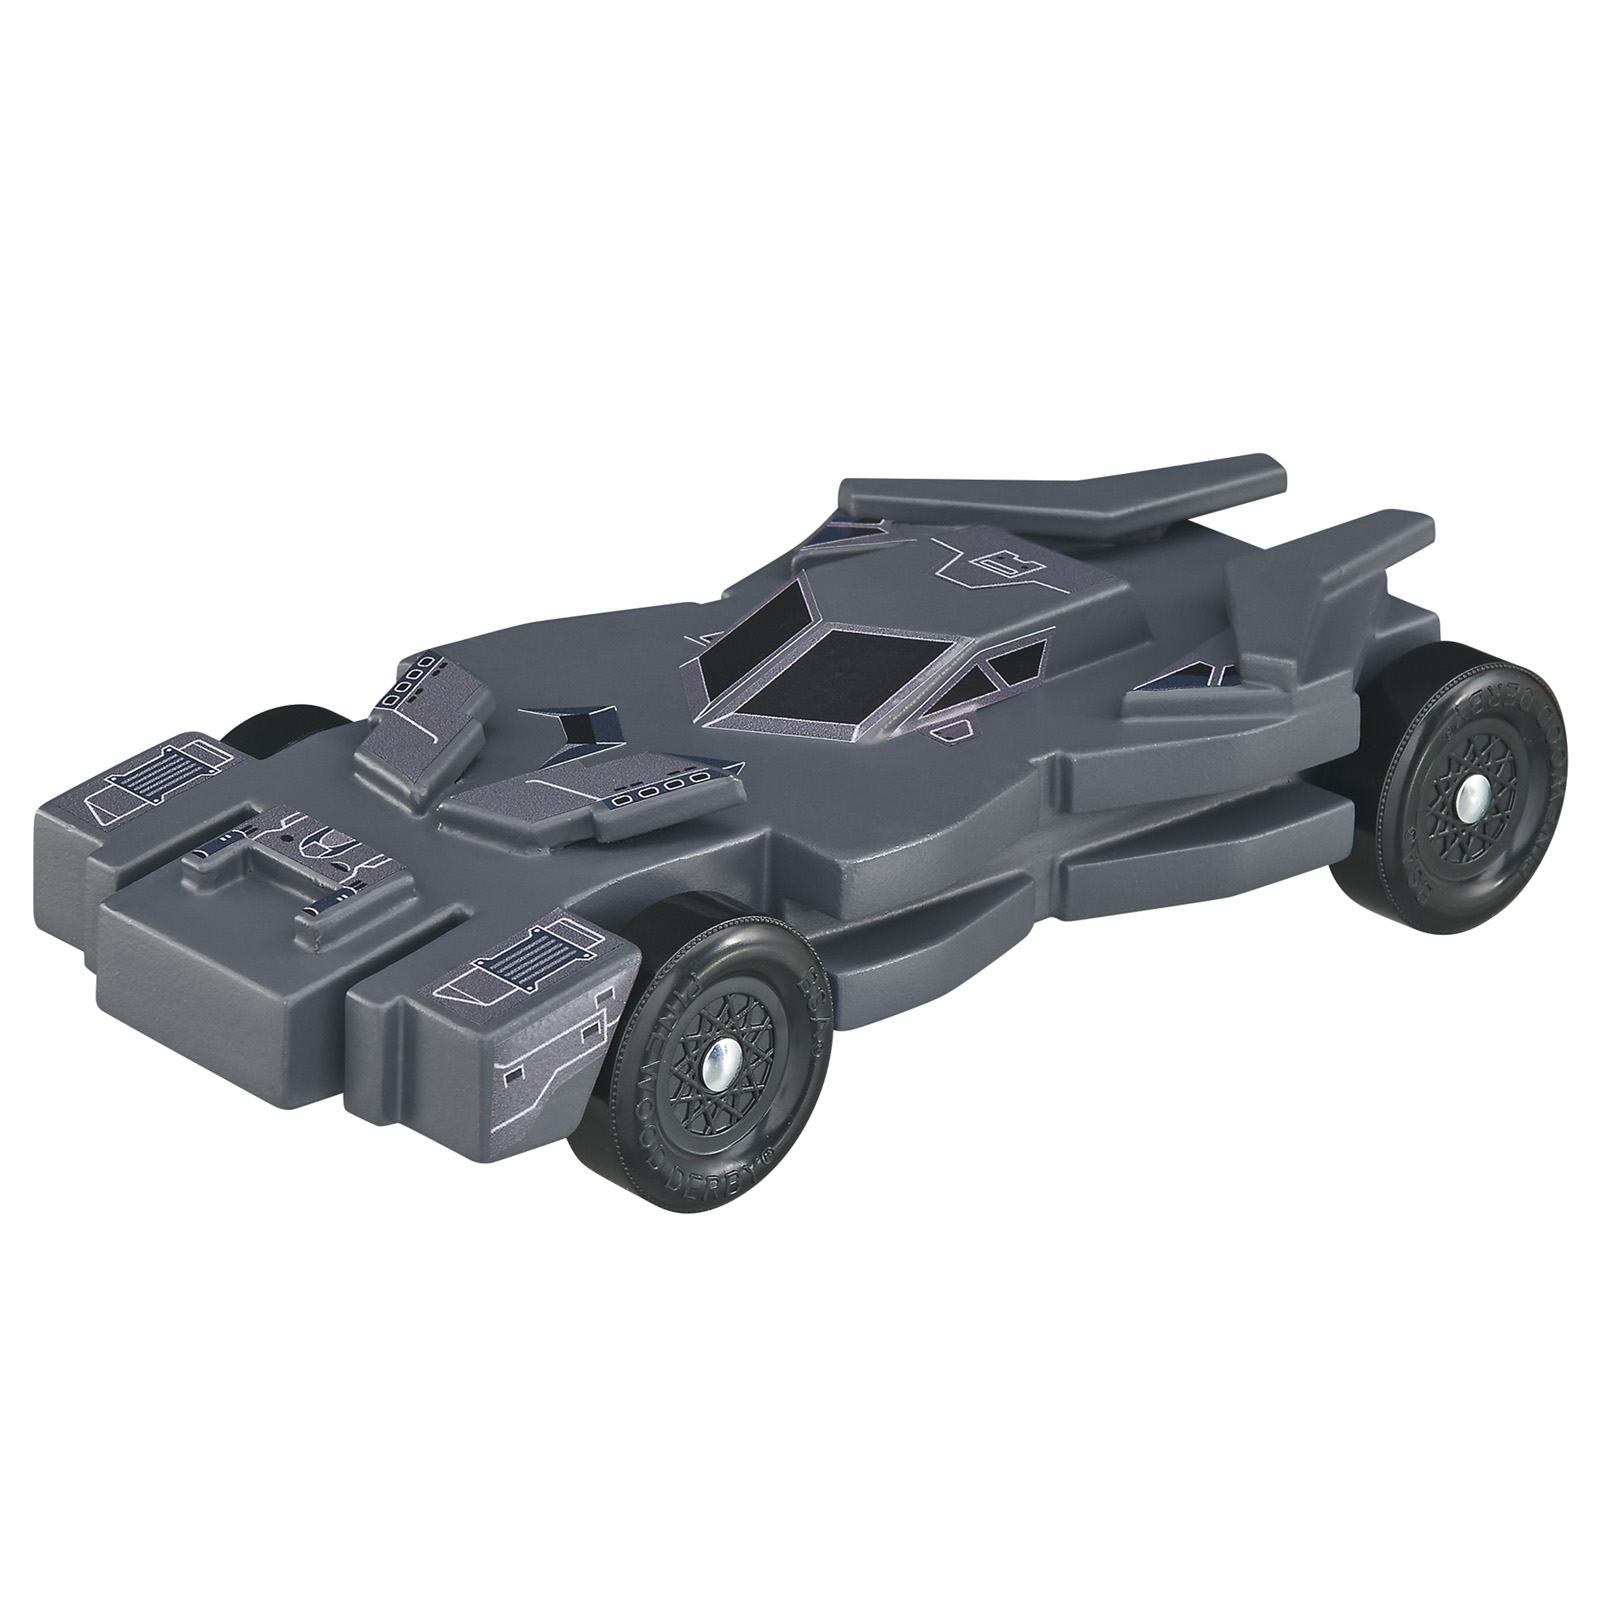 find-the-revell-pinewood-derby-racer-series-batmobile-kit-at-michaels